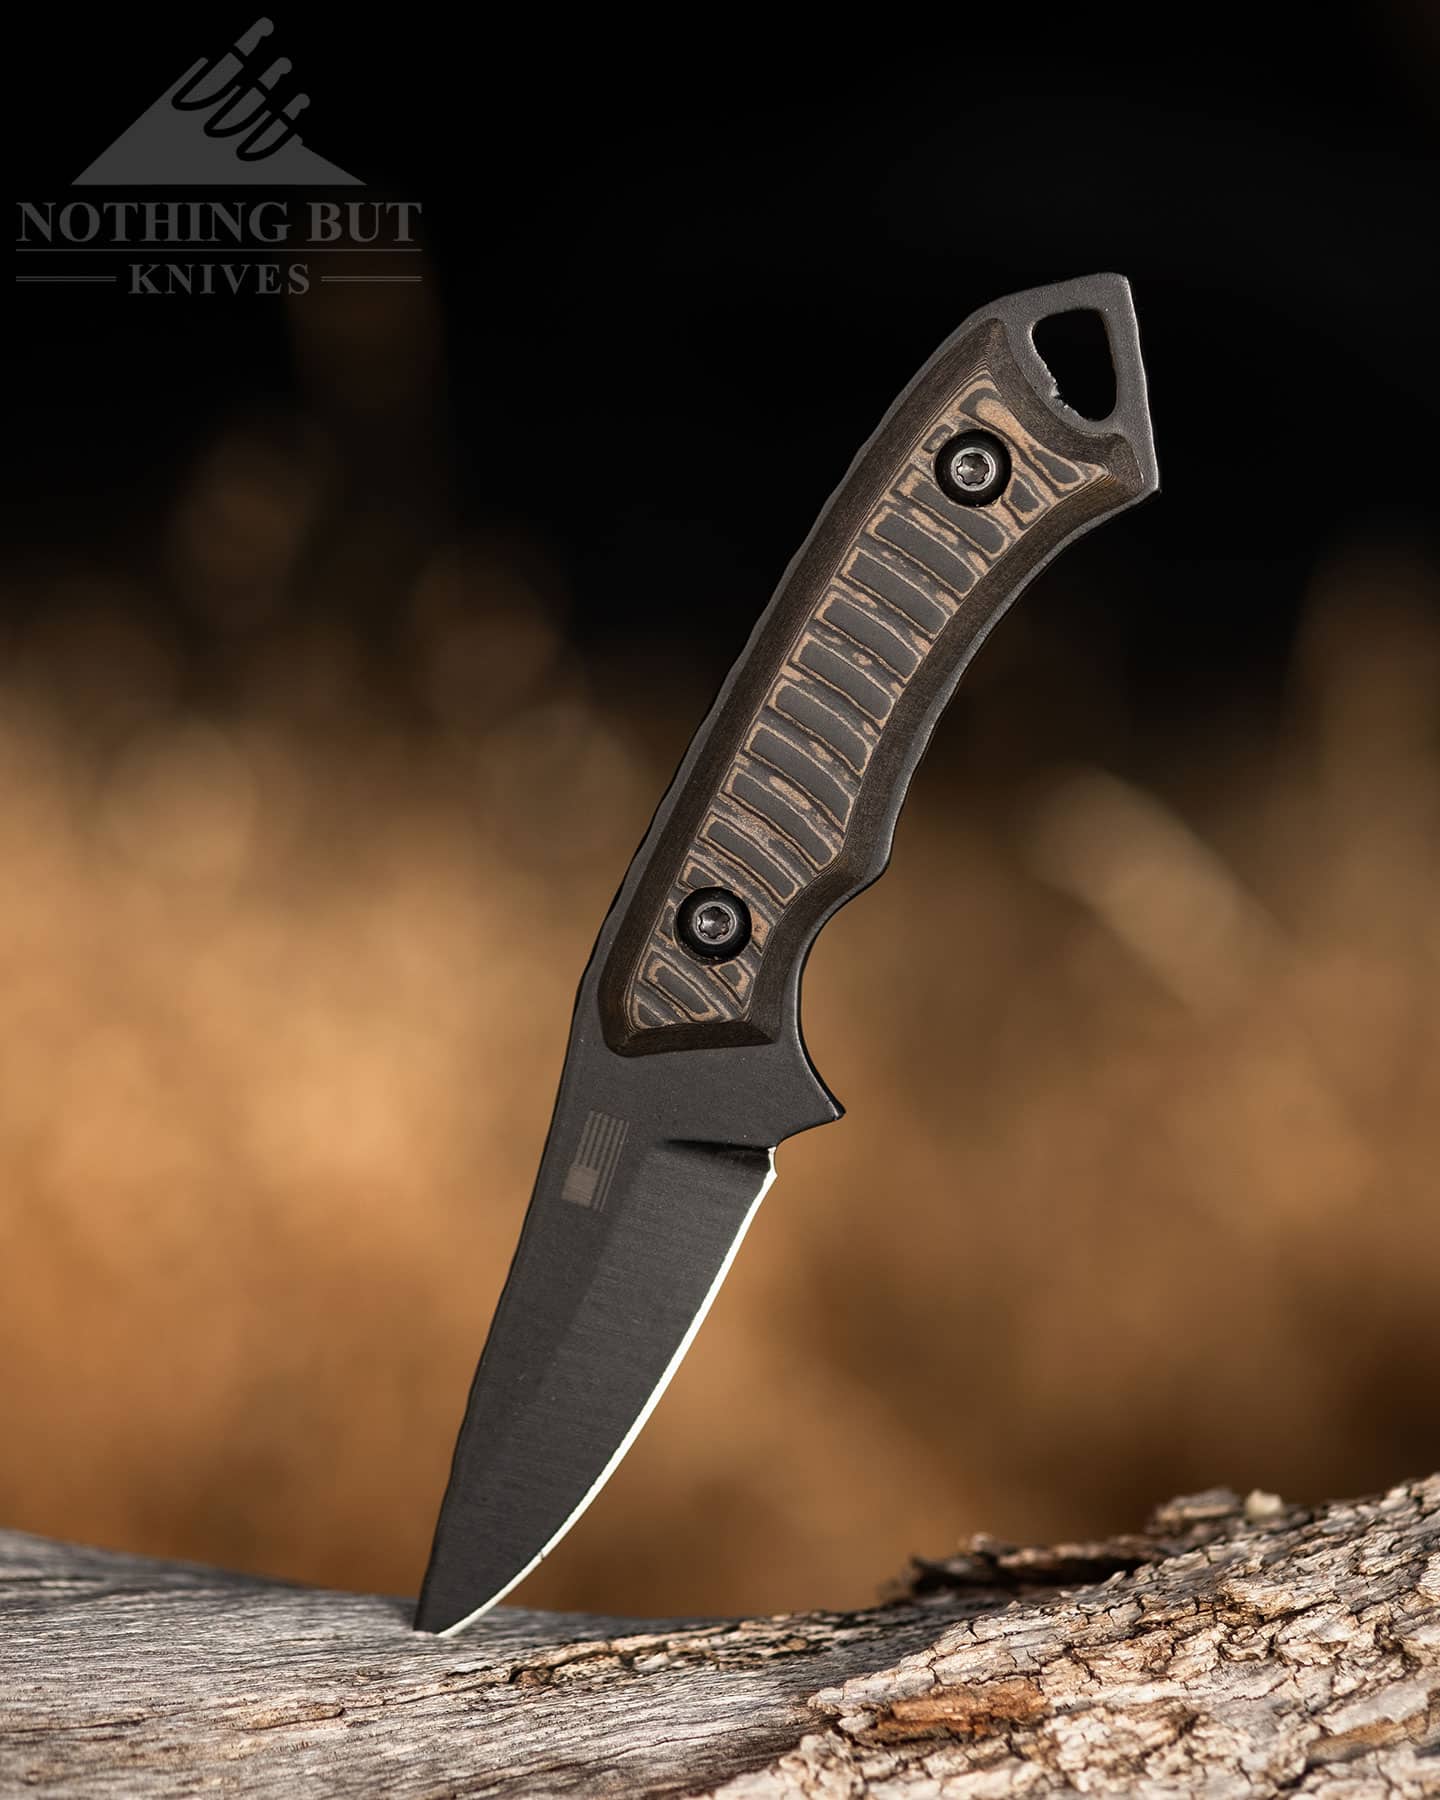 The Bonds Creek Badger is a great option for everyday carry, and it ships with a sheath that can be configured for all multiple carry configurations.